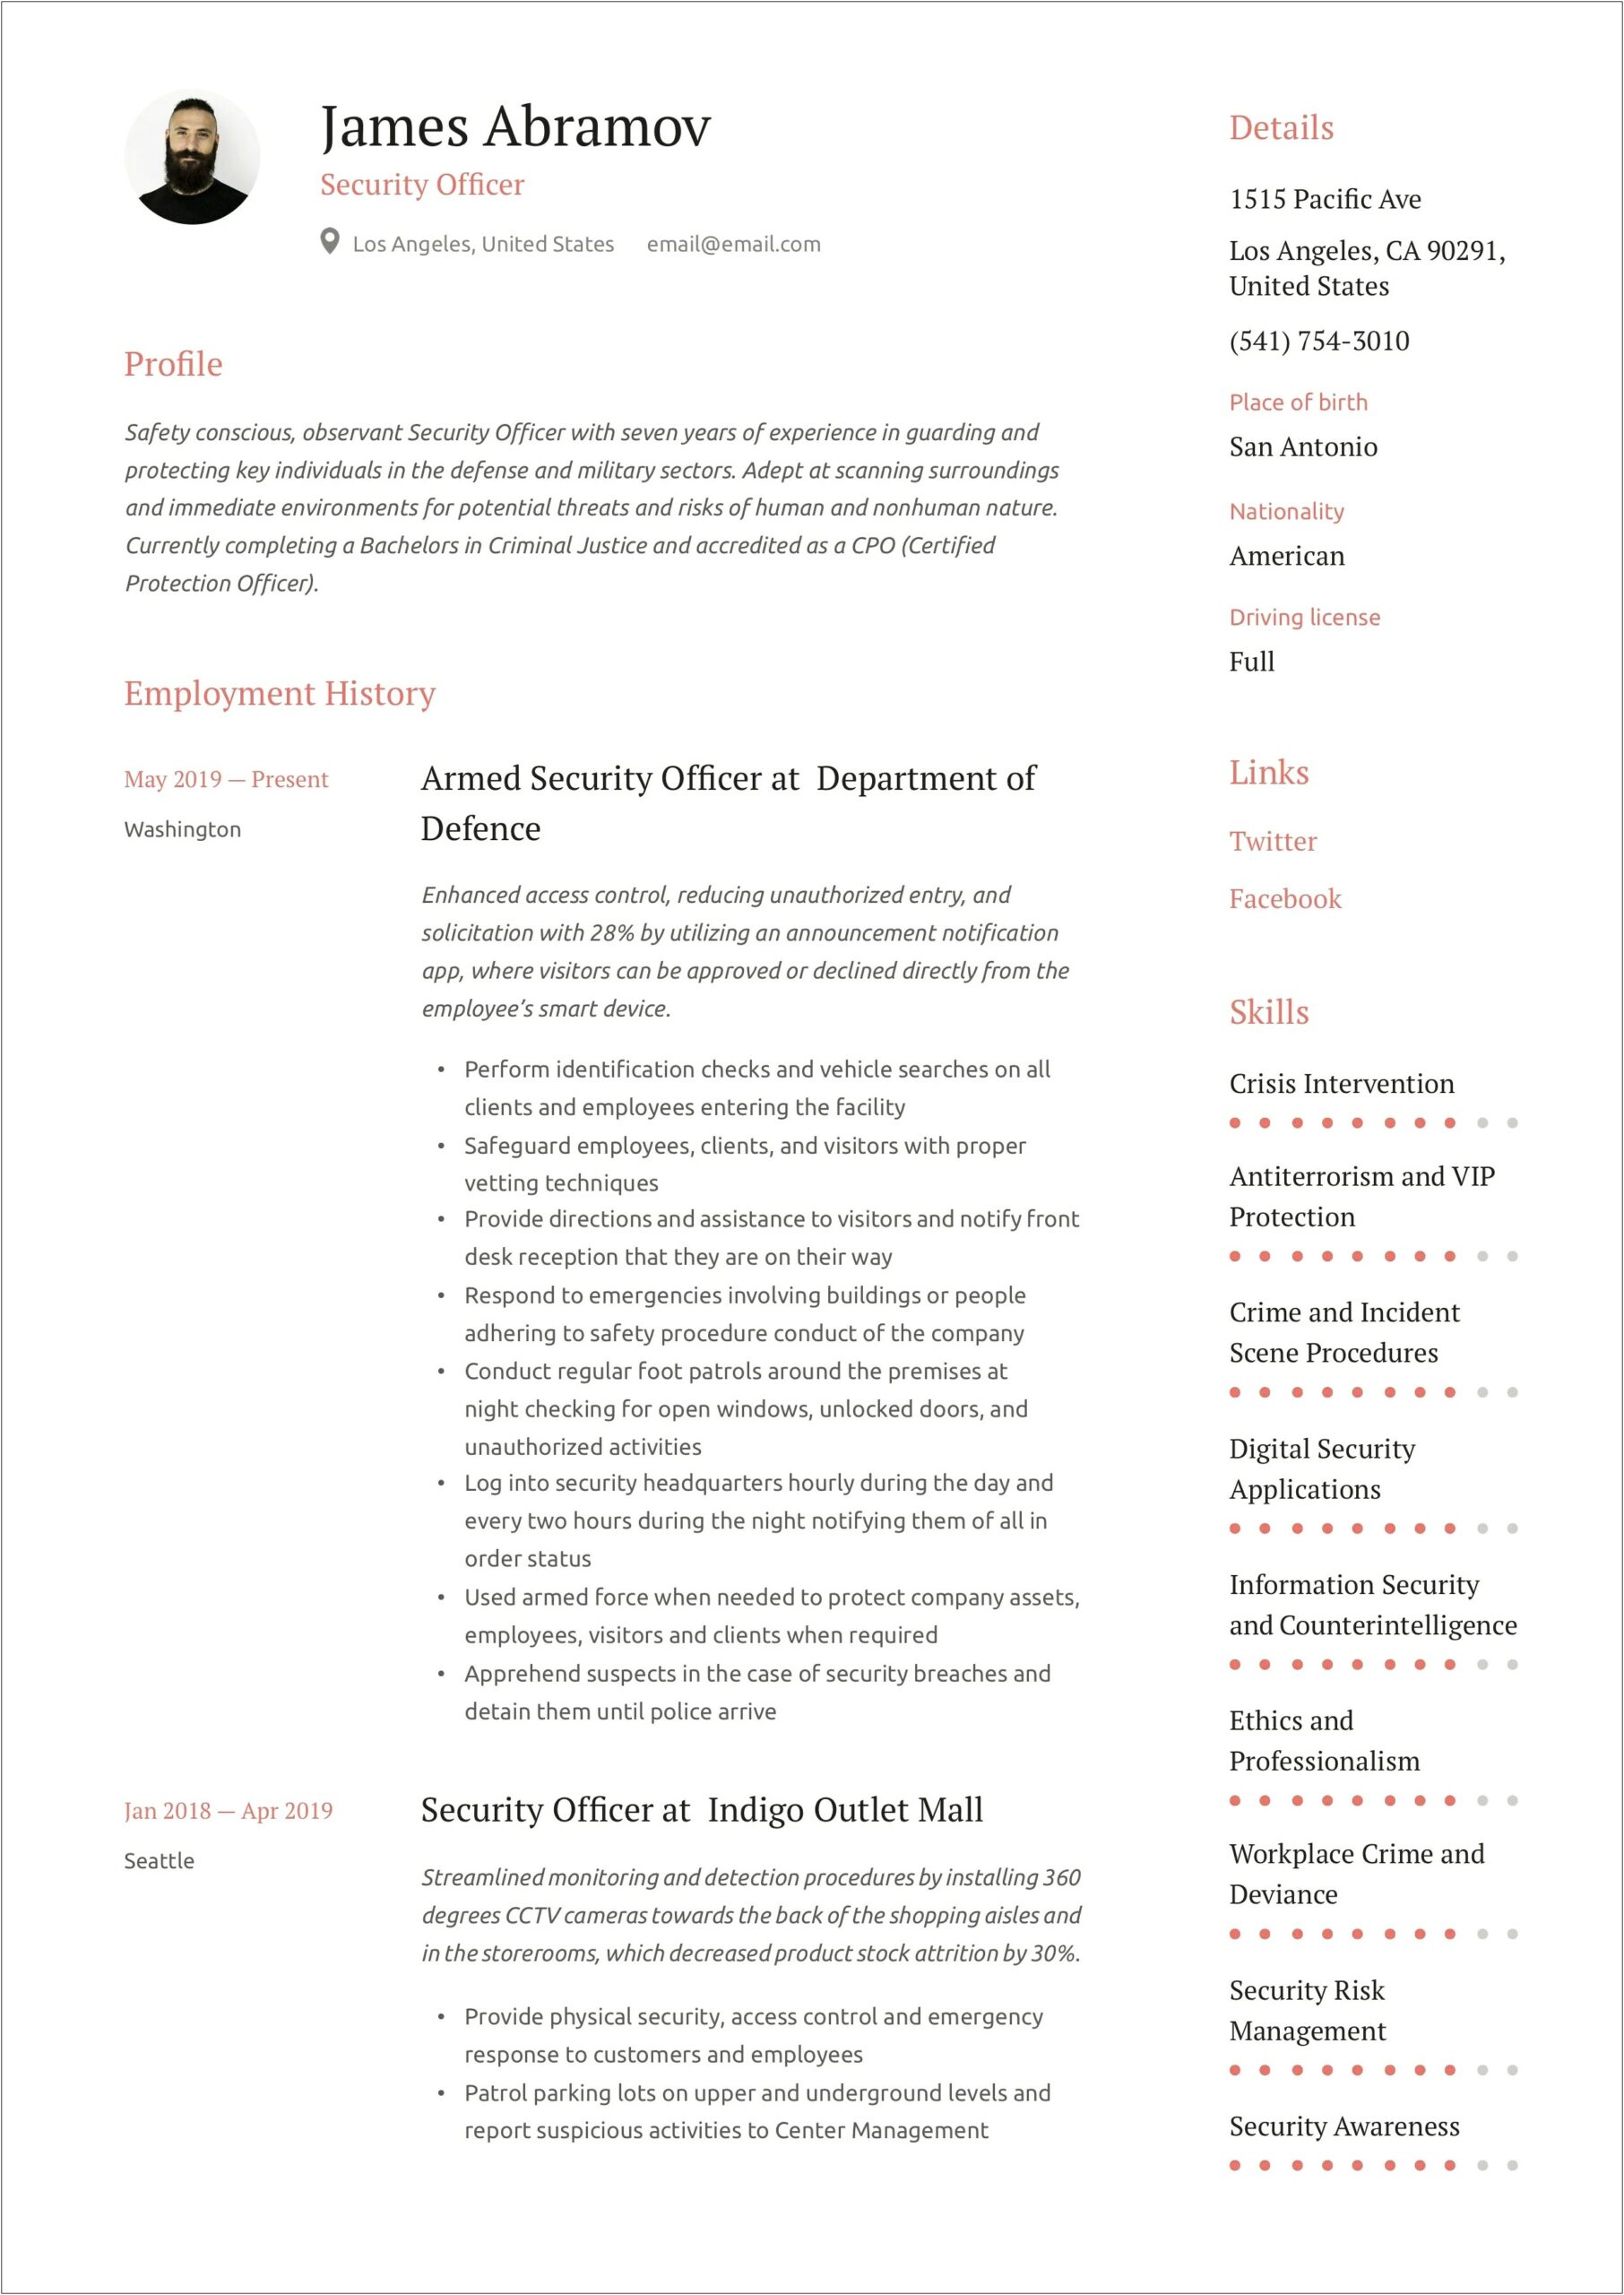 A Good Resume For Security Job